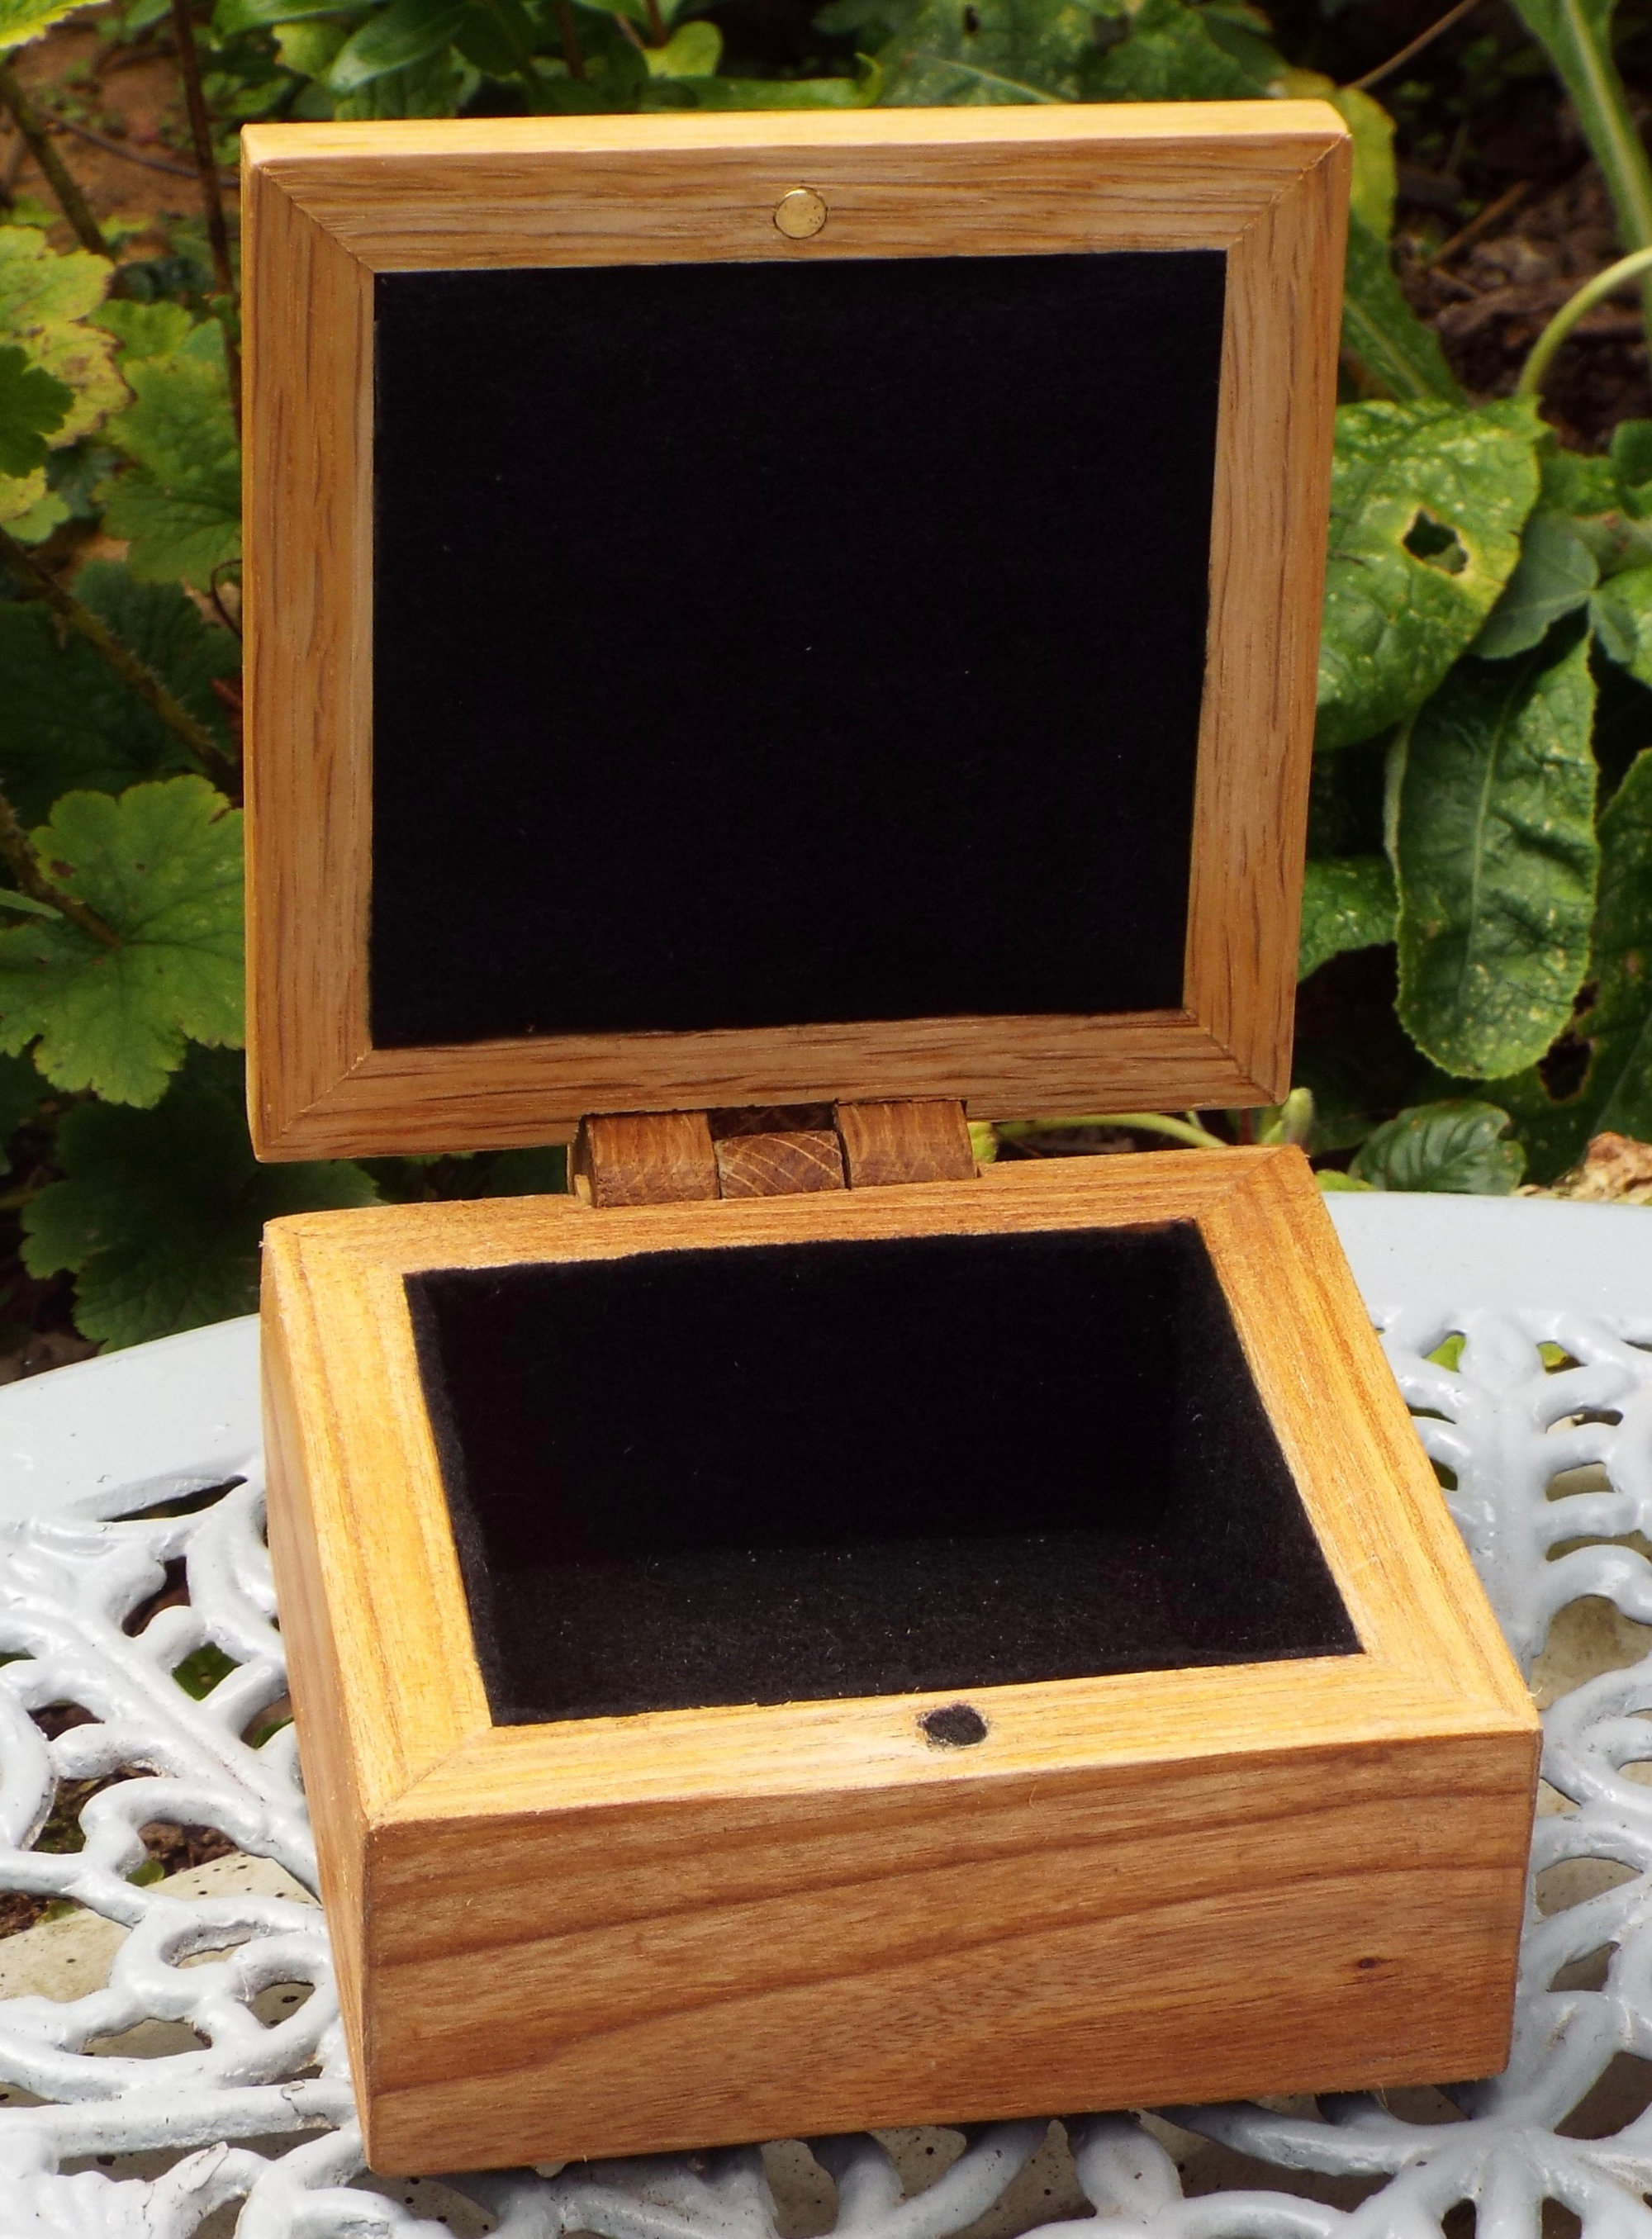 Wooden box by Richard Woodgate.